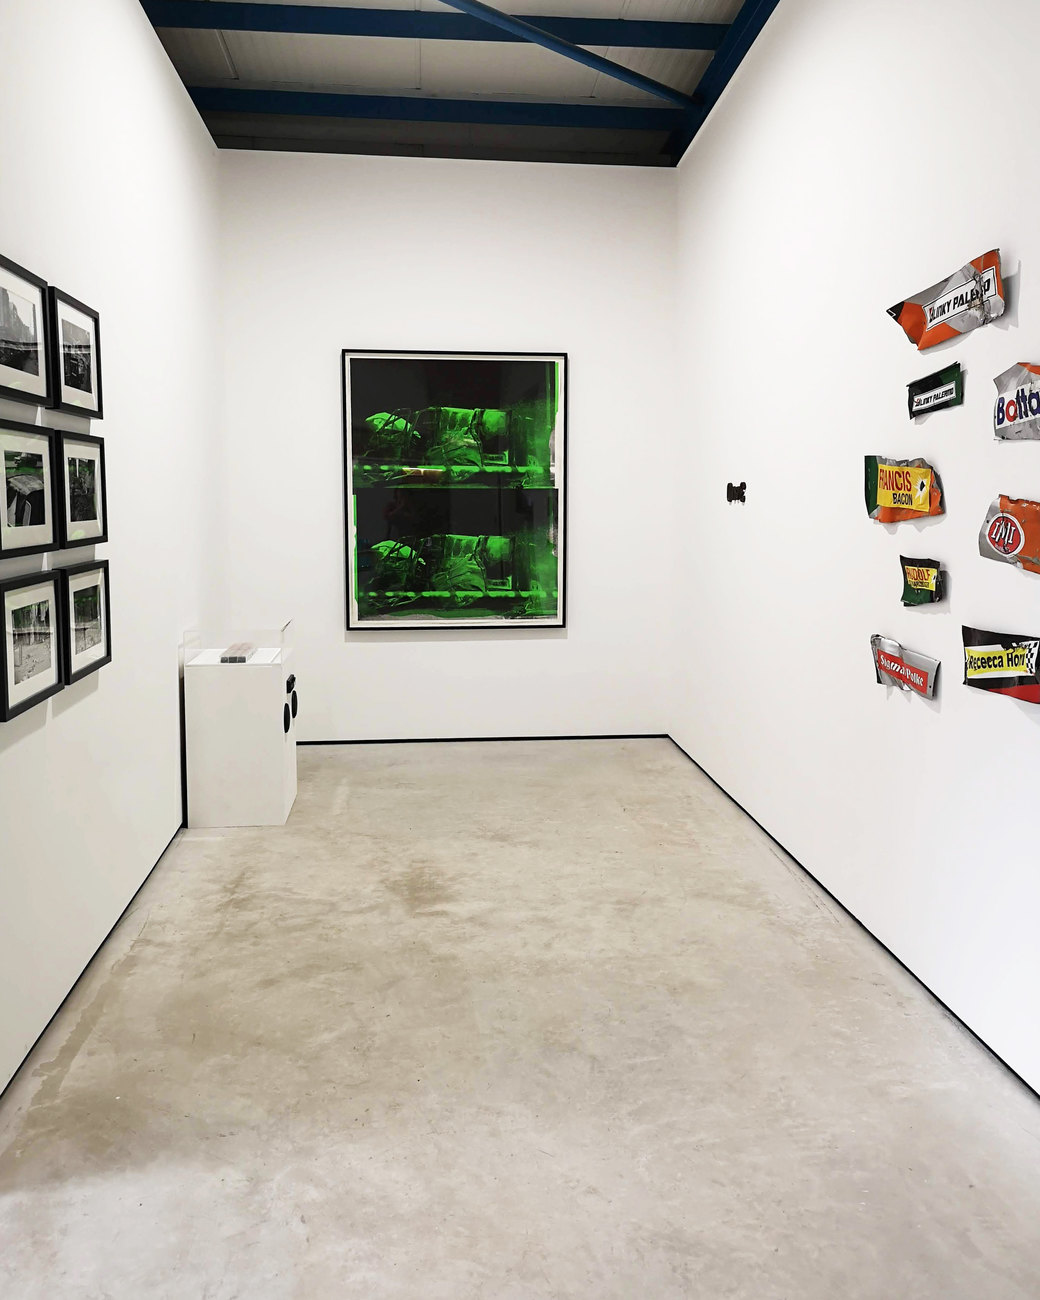 An image of artworks in an exhibition